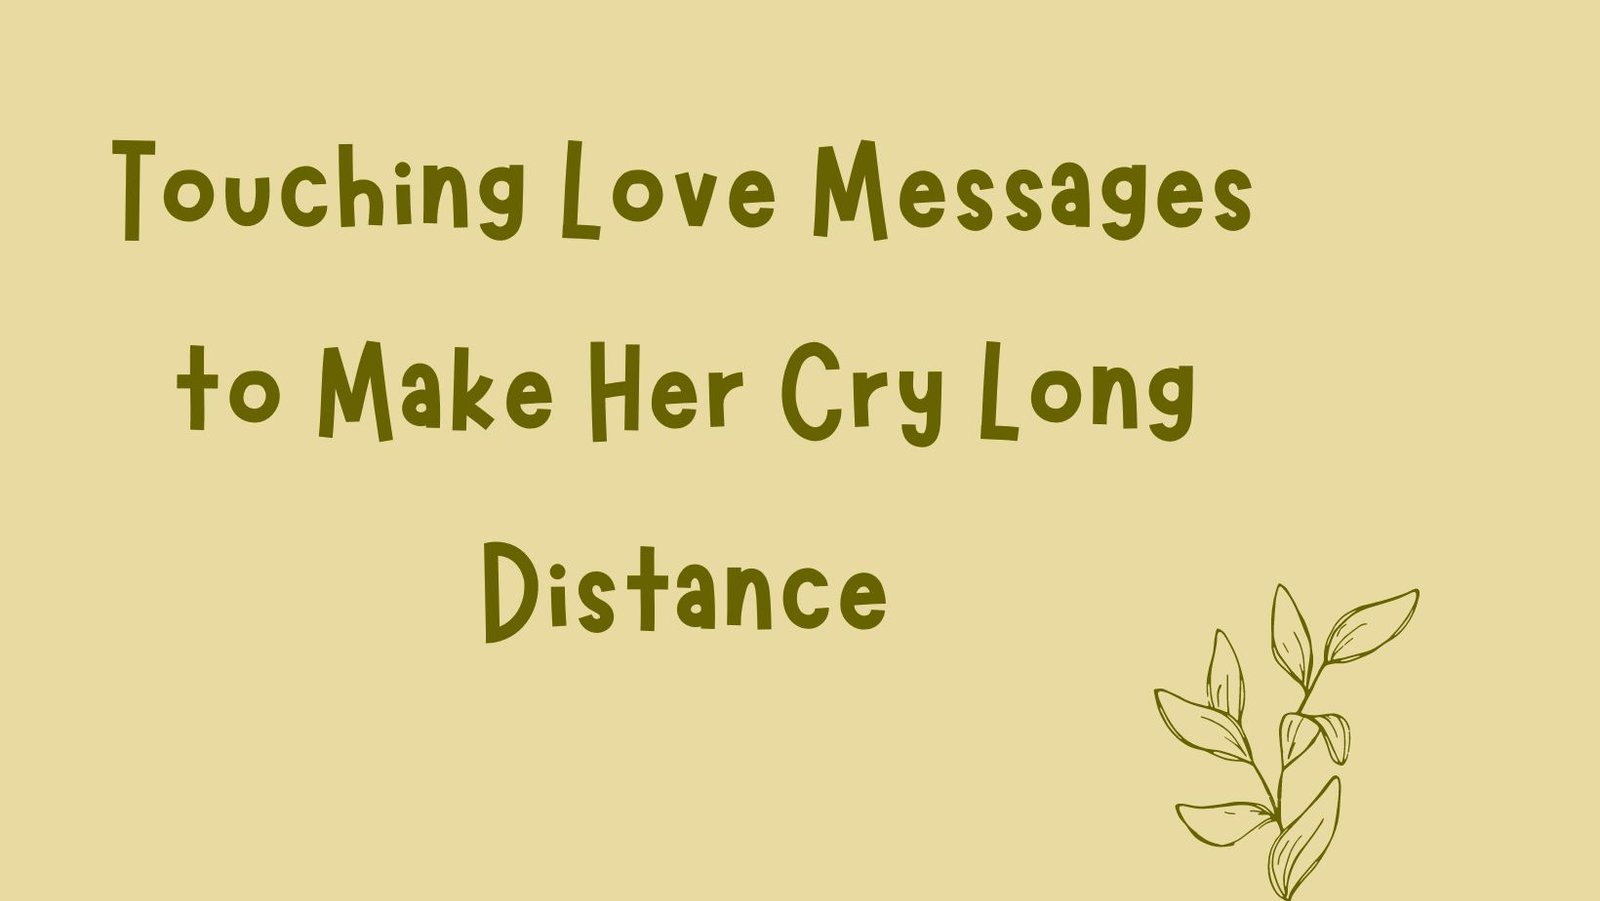 Touching Love Messages to Make Her Cry Long Distance